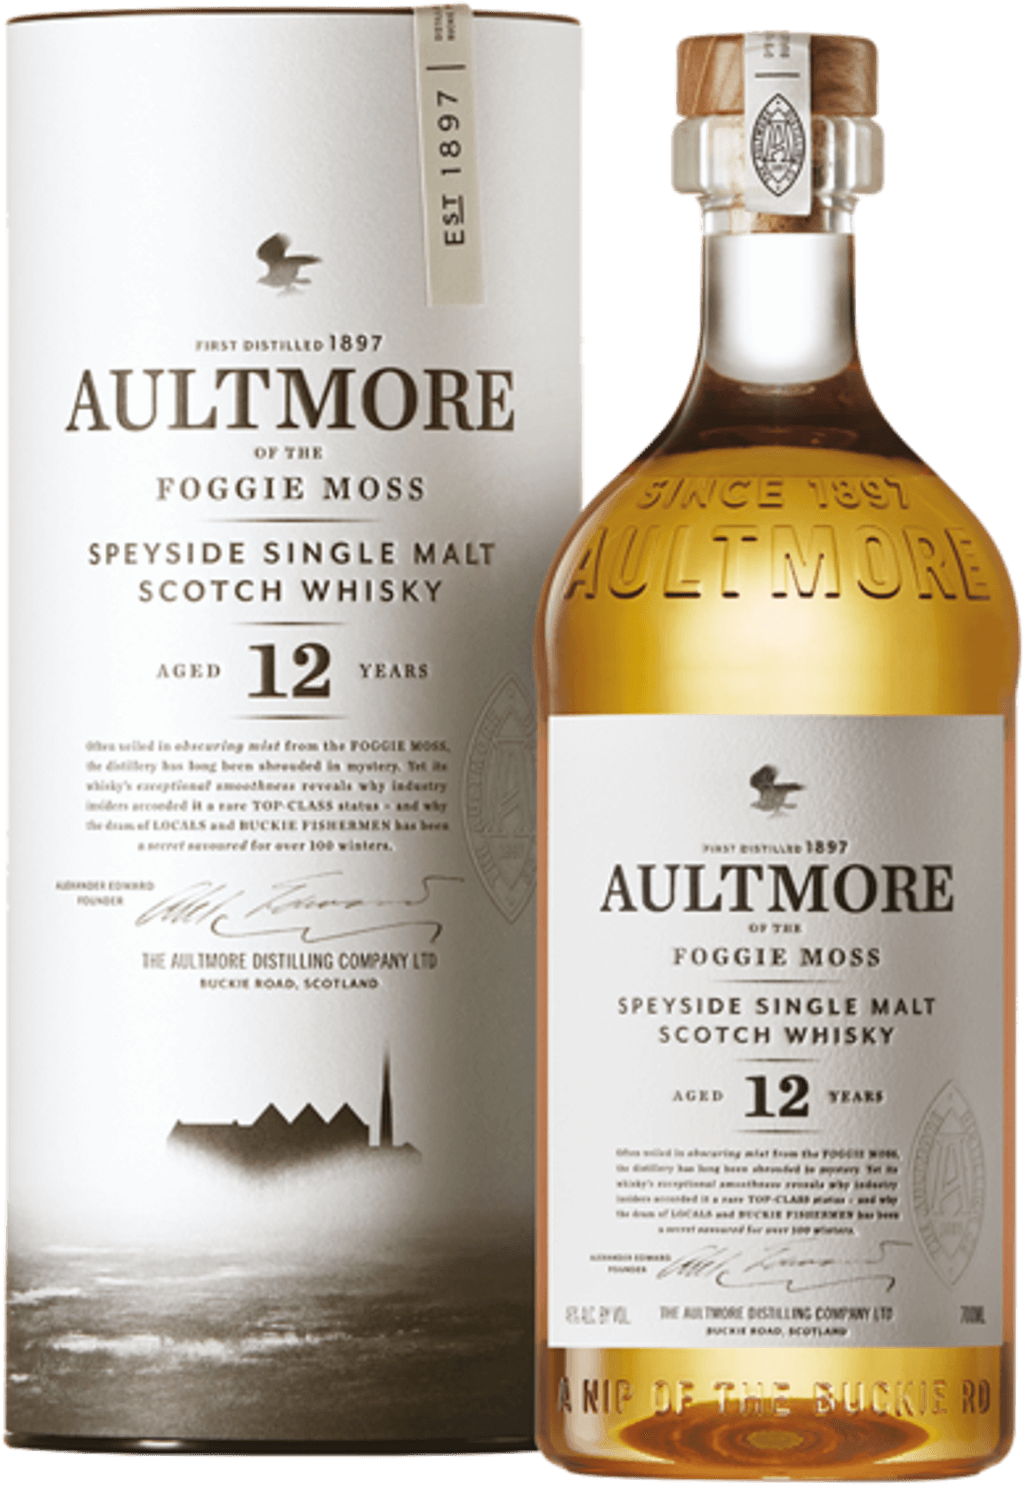 Aultmore 12 Years Old Speyside Single Malt Scotch Whisky (gift box) glen turner 12 years old single malt scotch whisky gift box